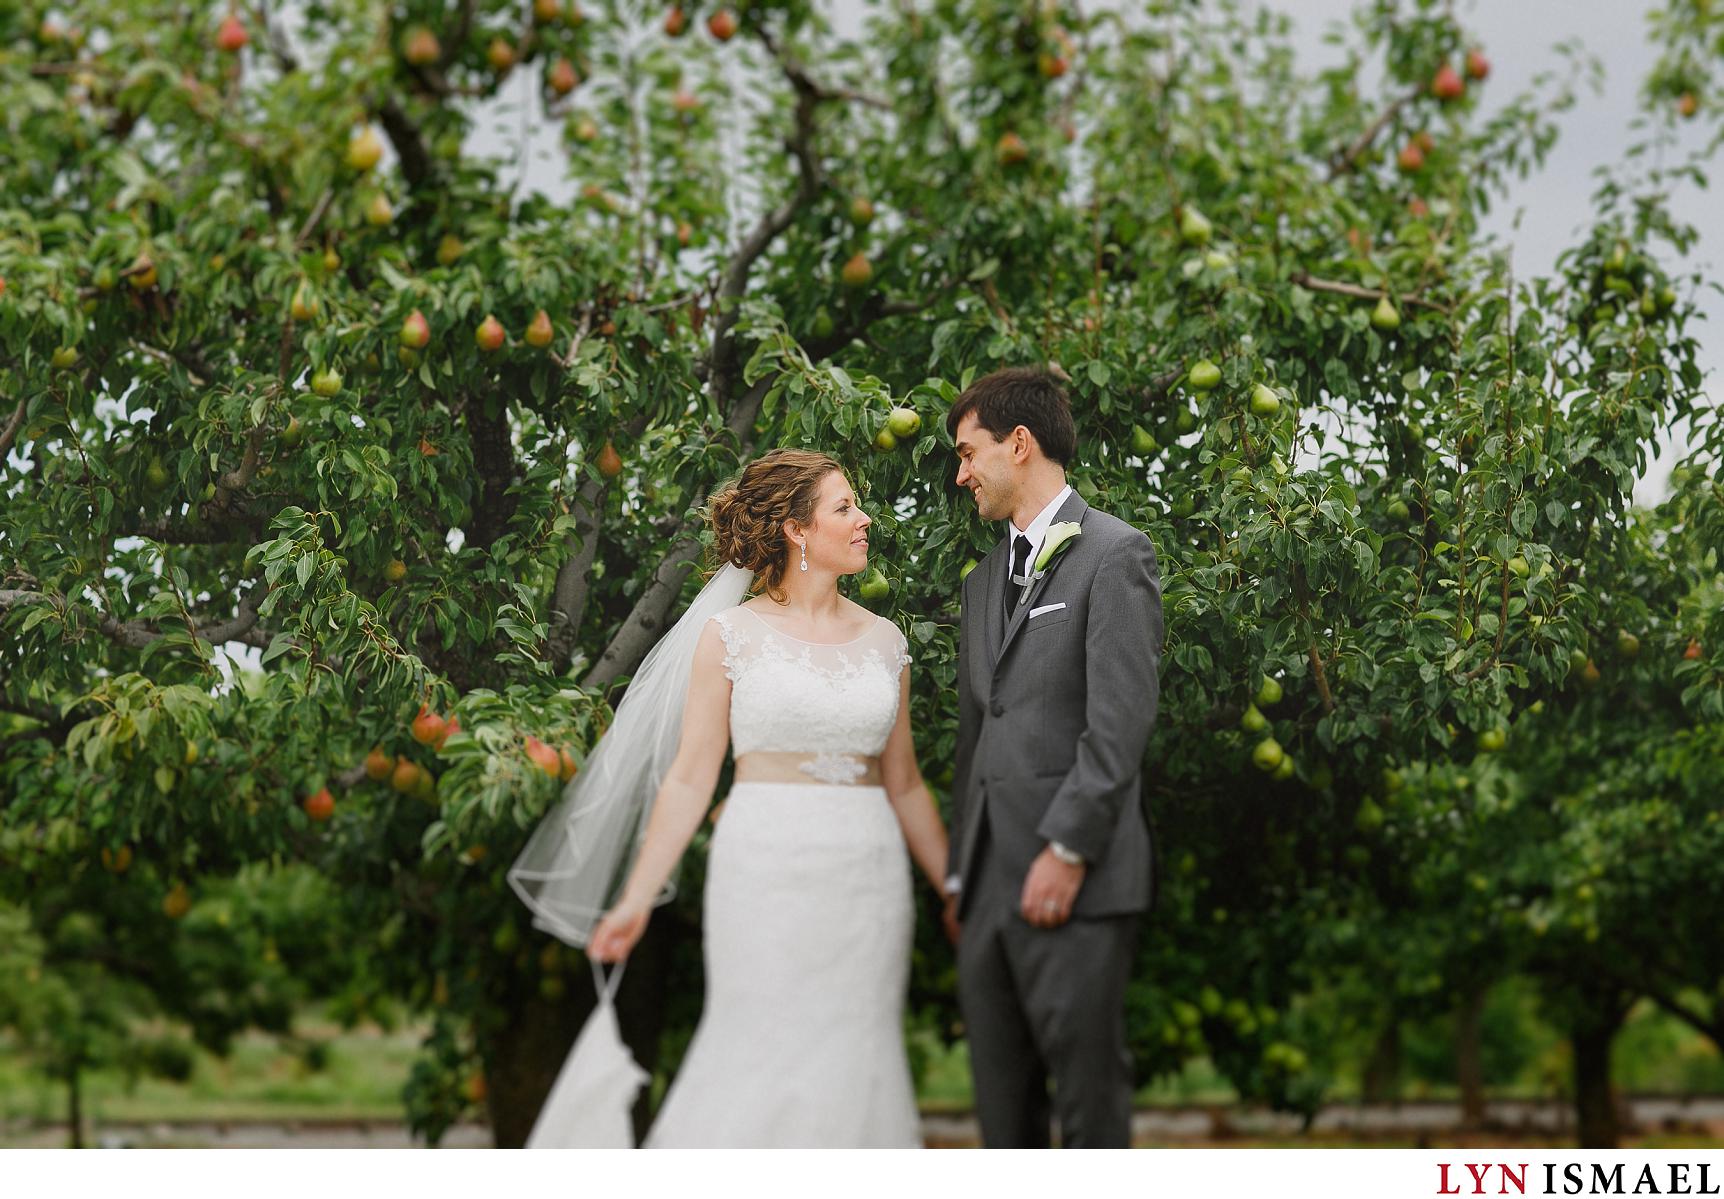 Portrait of a bride and groom in a pear orchard at Puddicombe Farms in Winona, Ontario.